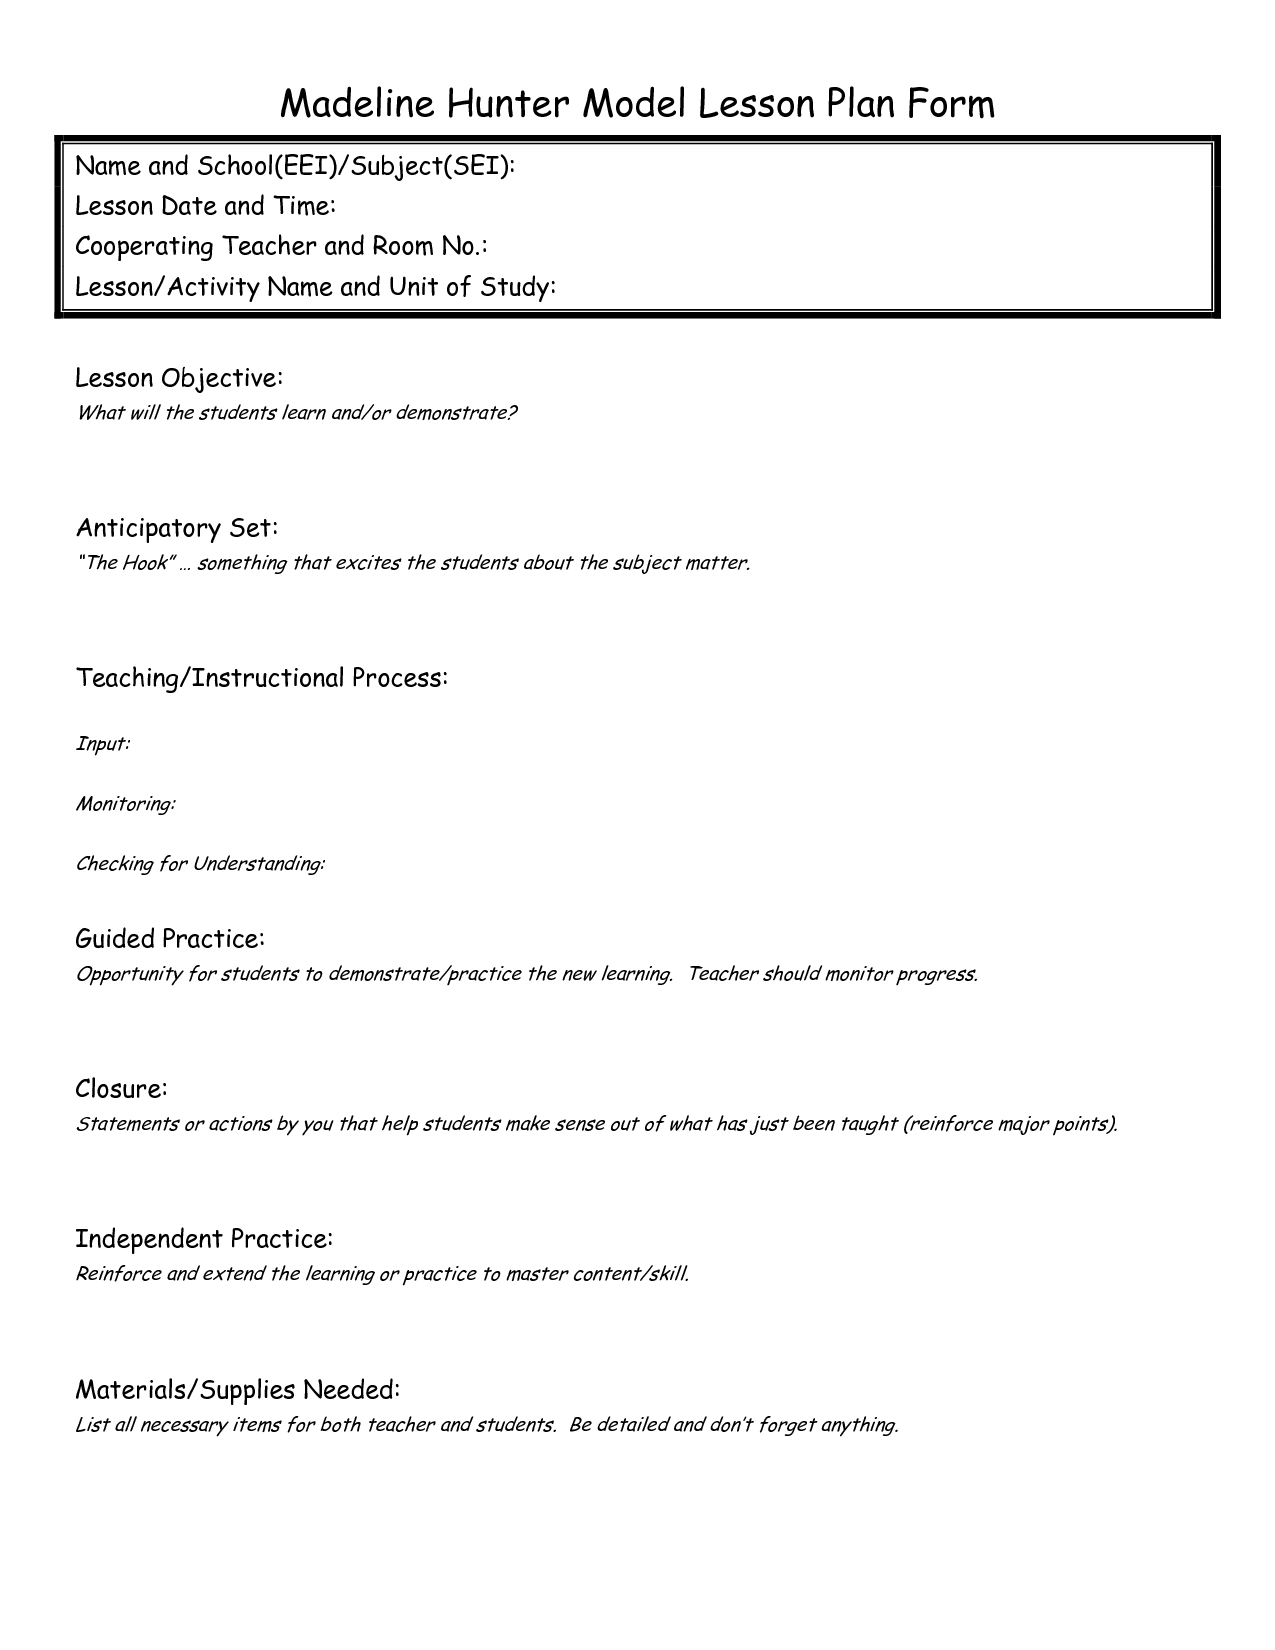 Eei Lesson Plan | Lesson Plan Format, Madeline Hunter Lesson With Regard To Madeline Hunter Lesson Plan Template Blank